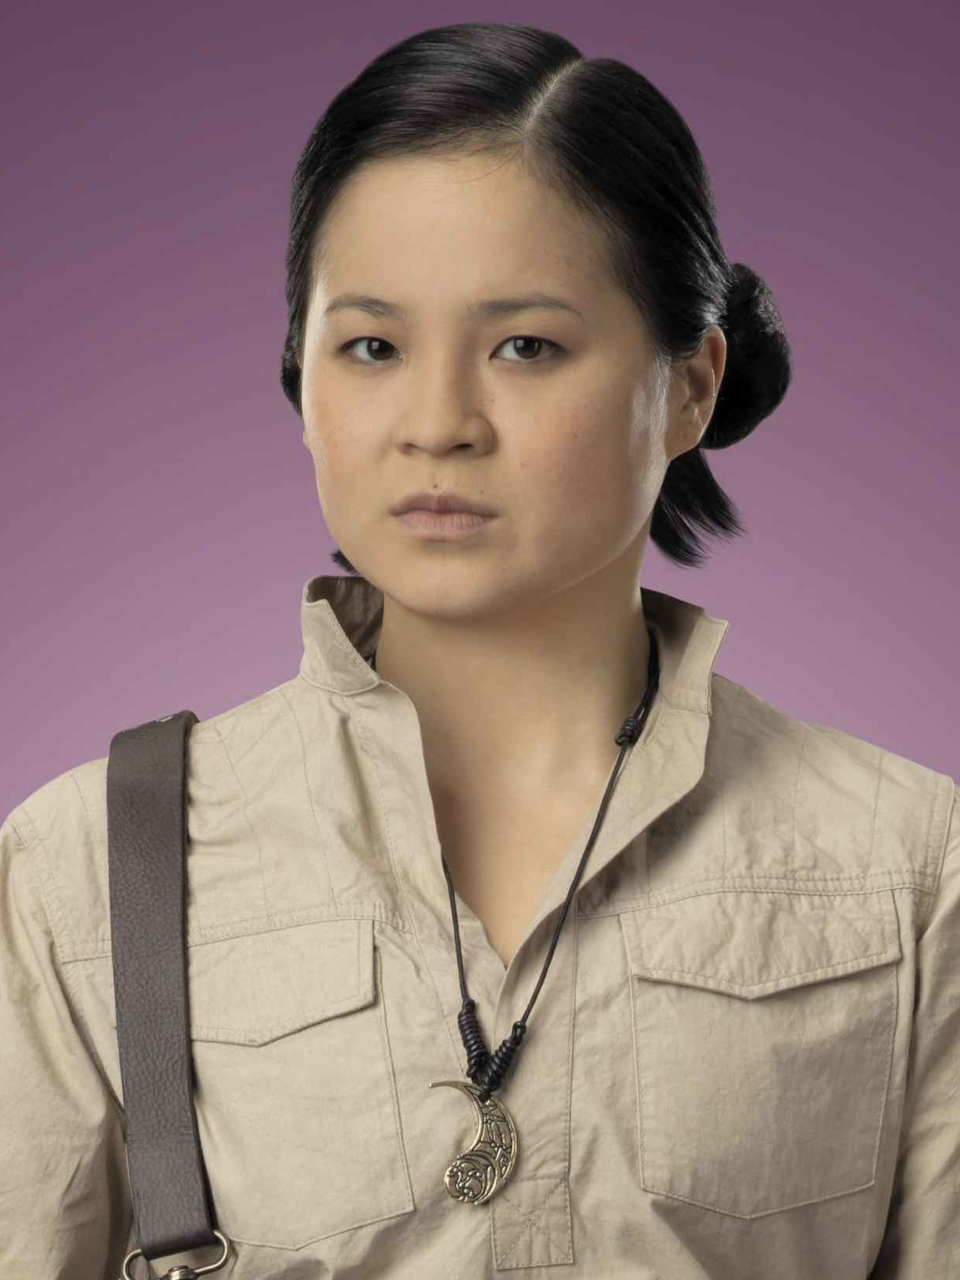 Who played Rose Tico in Star Wars?